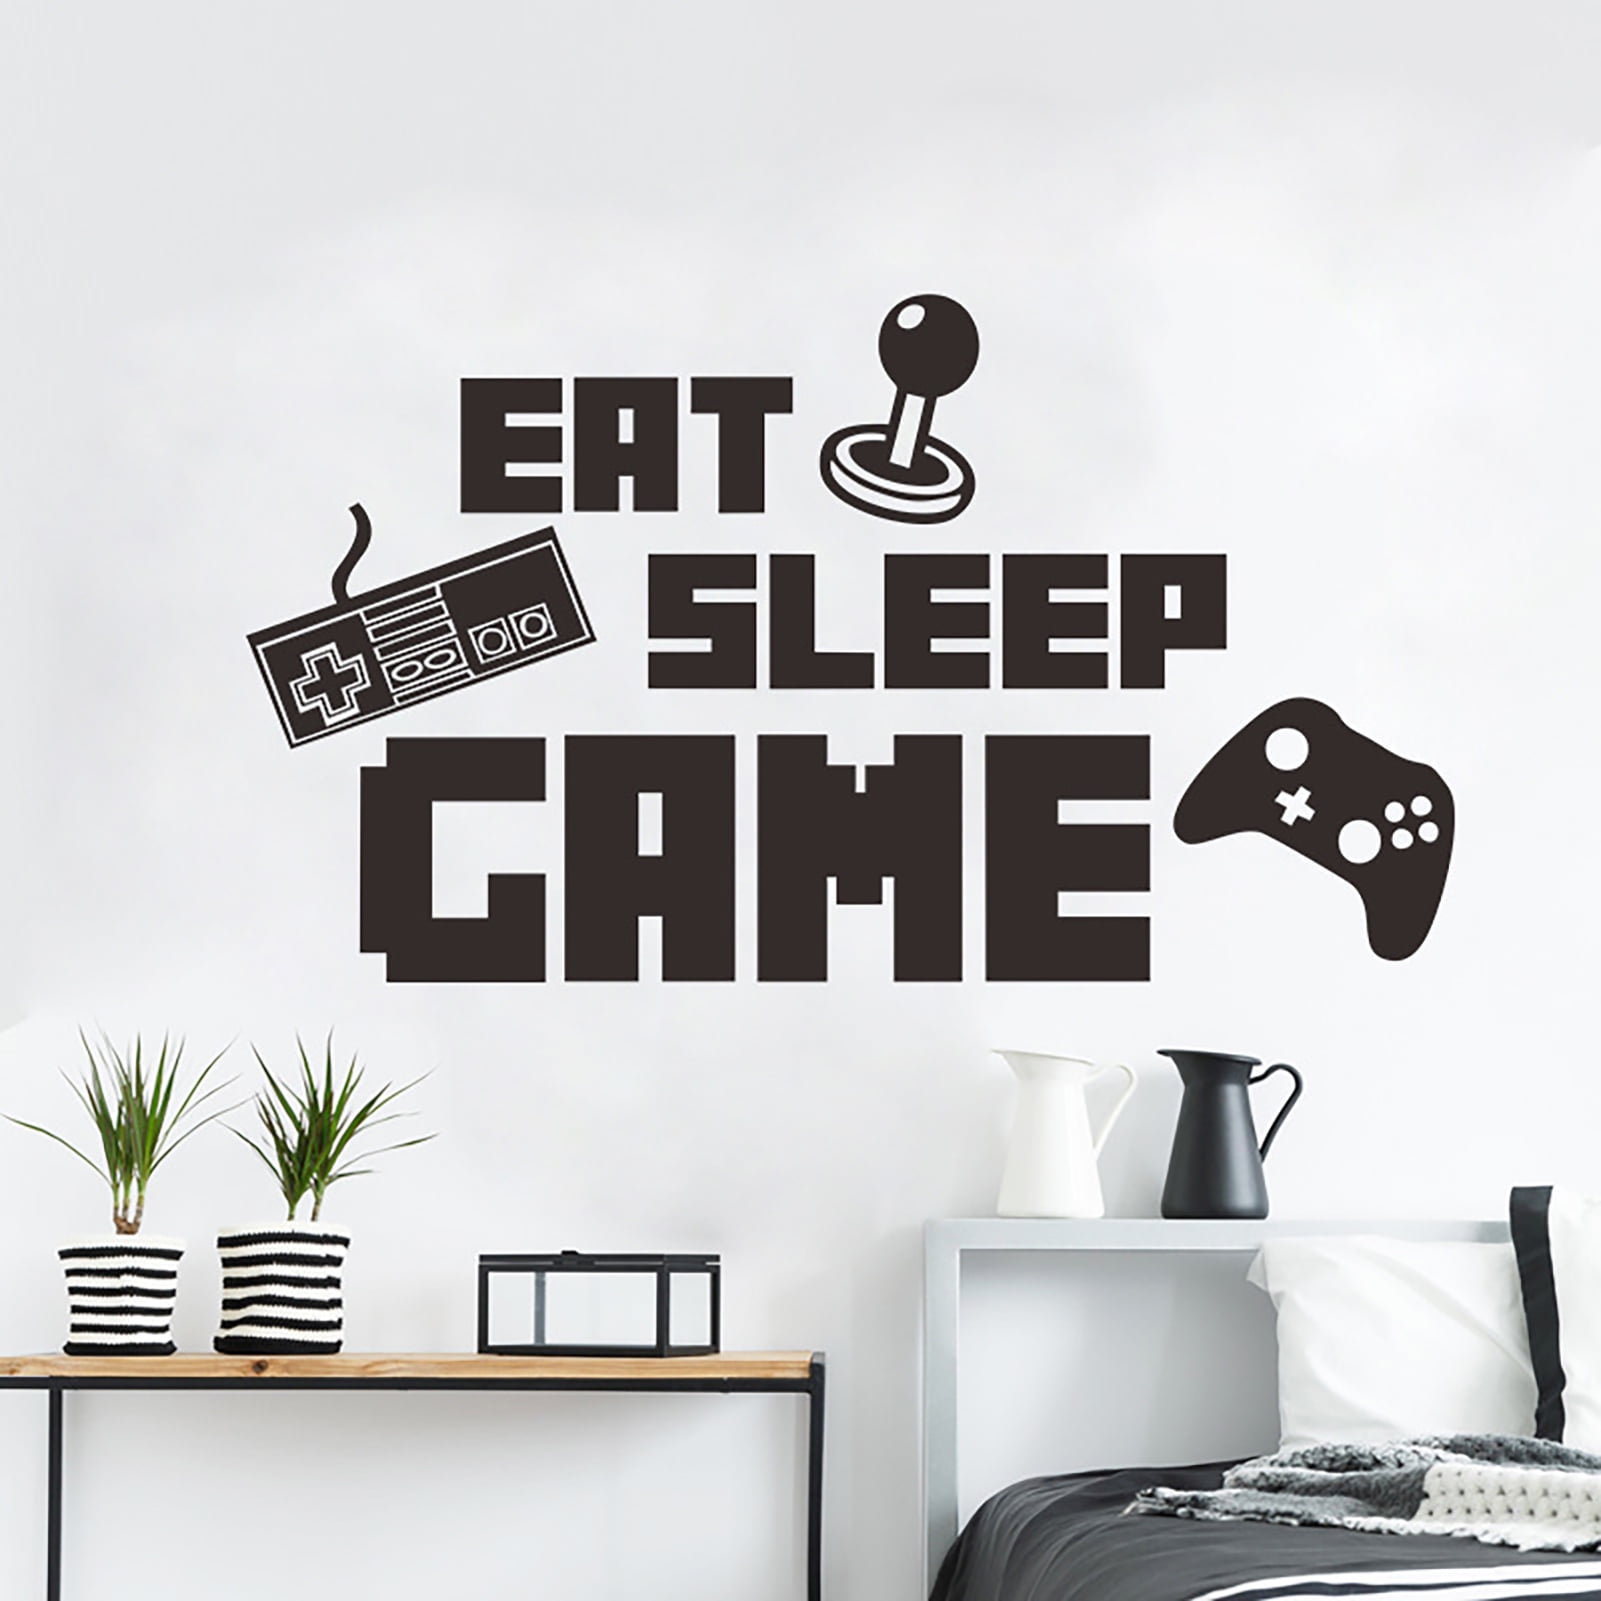 Details about   Video Game Gaming Gamer Wall Decal Art Vinyl Decor Sticker Boys Room Wall Door